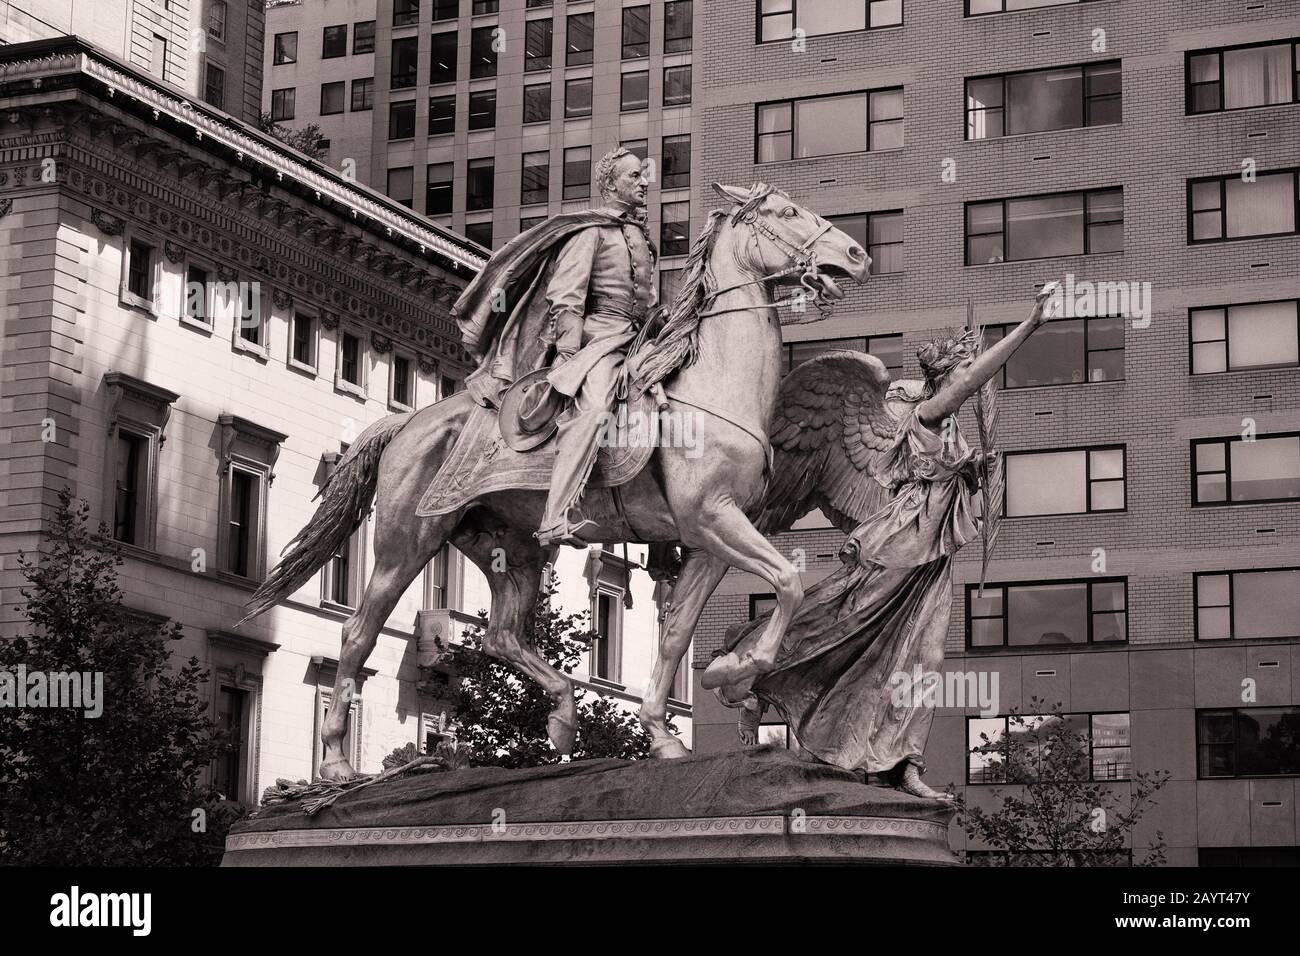 General William Tecumseh Sherman in cape on horse being led by winged victory, Greek Goddess Nike - the Sherman Memorial, Grand Army Plaza, New York Stock Photo